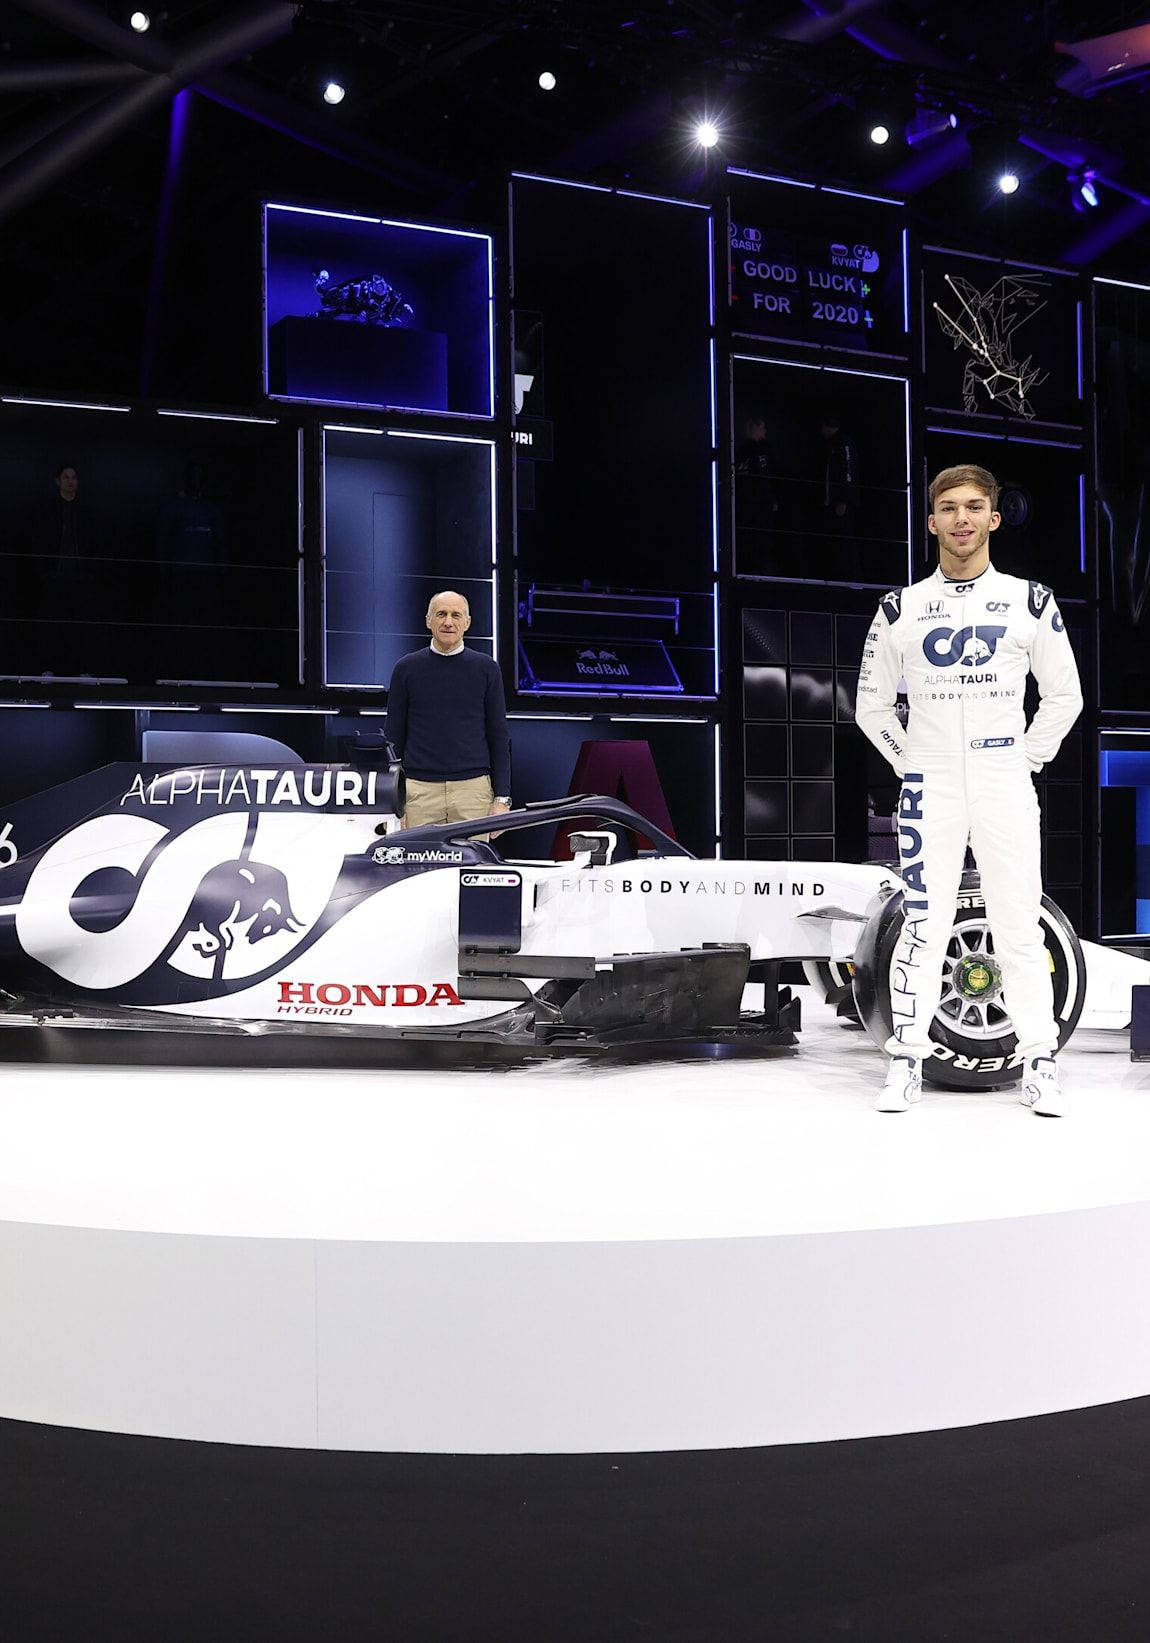 Pierre Gasly Standing Beside His Car Wallpaper